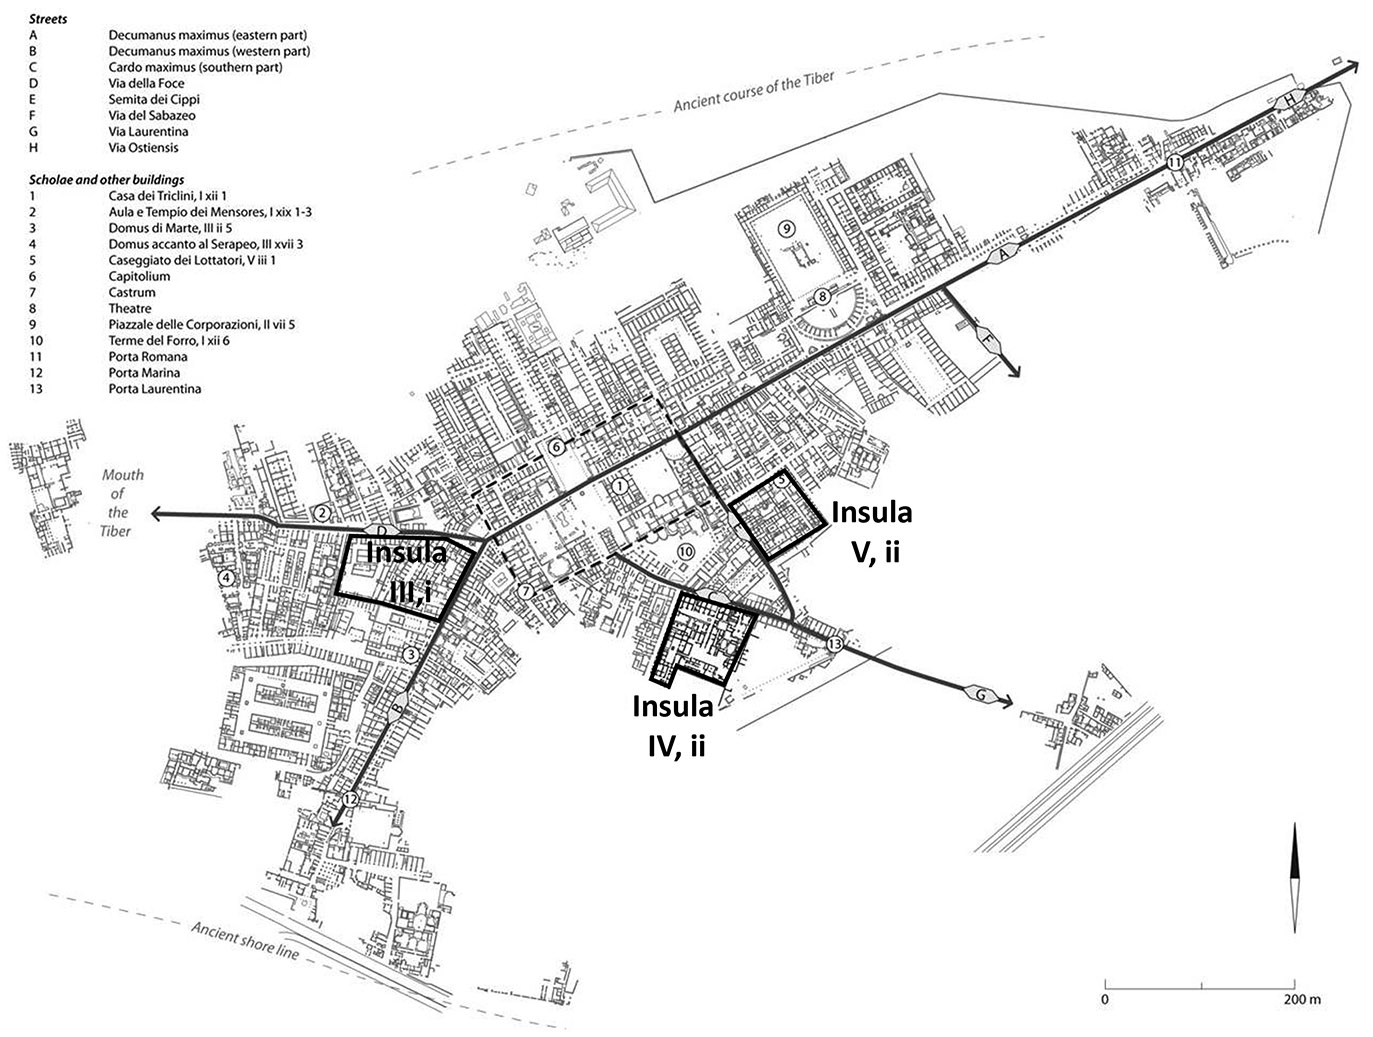 <strong>Figure 1:</strong> Insulae examined in this study (Locicero 2020, fig. 0.1, after H. Stöger, <em>Rethinking Ostia: A Spatial Enquiry into the Urban Society of Rome’s Imperial Port-town</em>, Leiden University Press 2011, v).